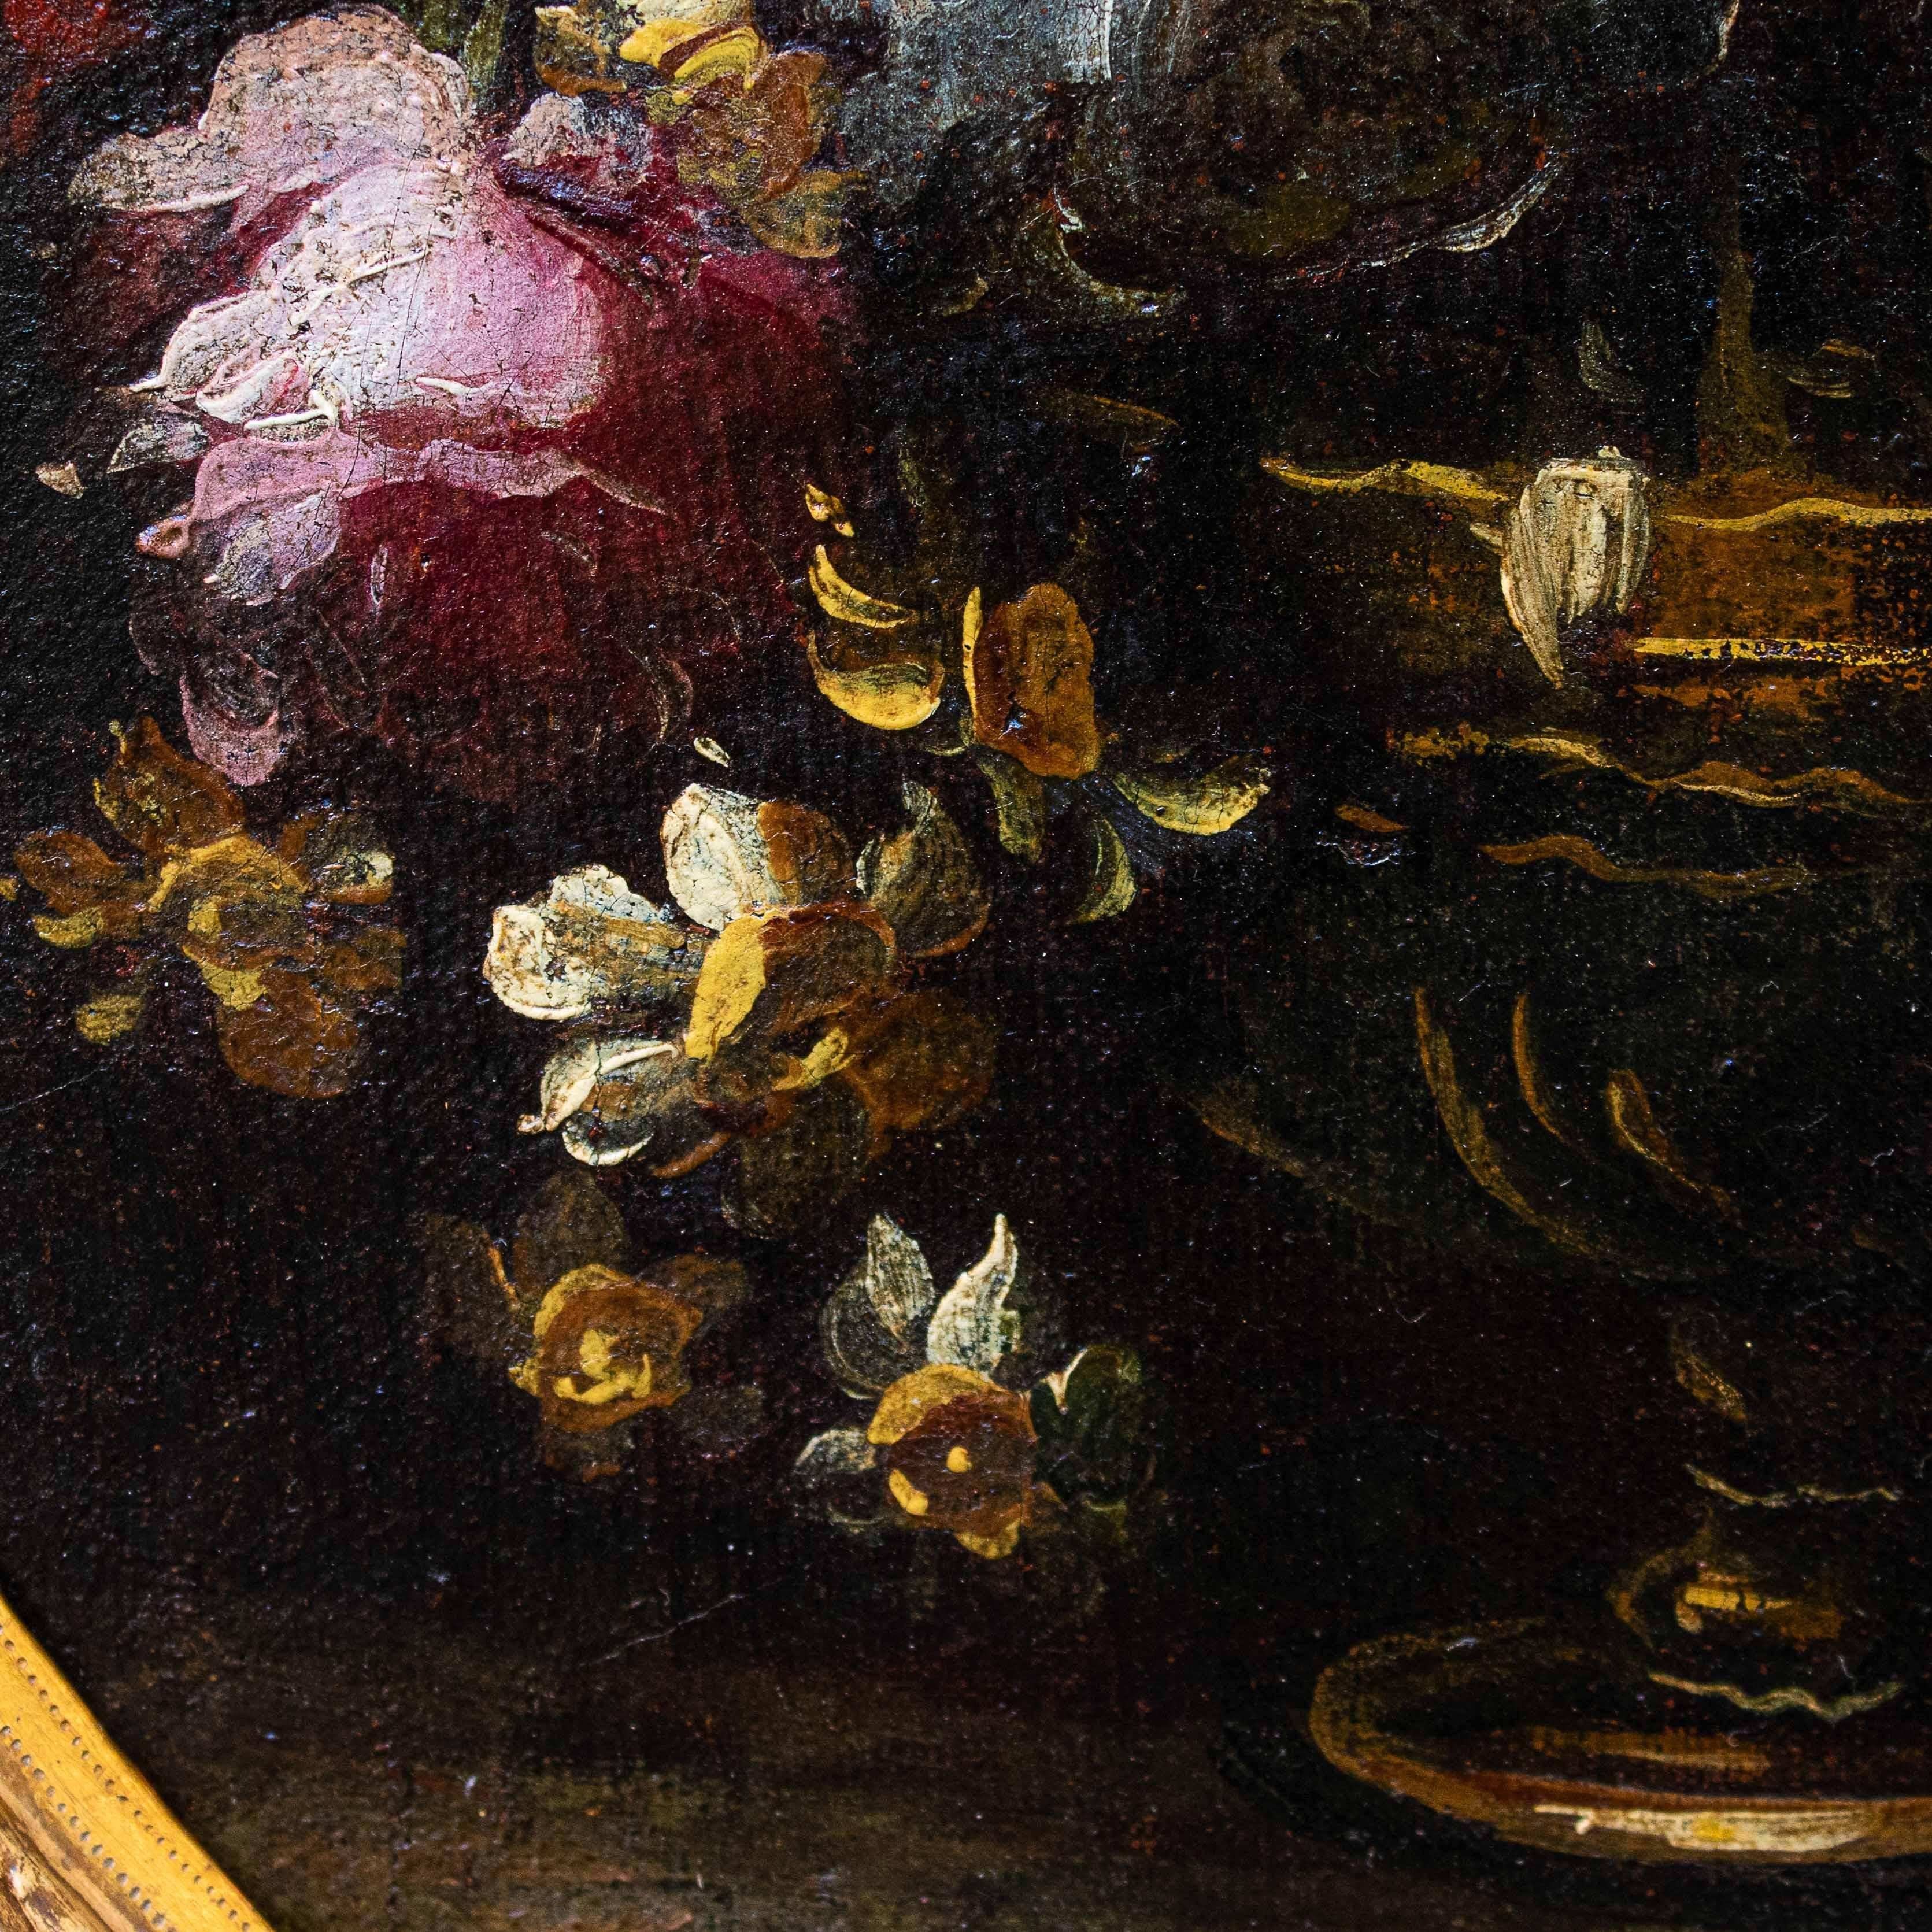 17th Century Still Lifes with Flowers Paintings Oil on Canvas 7